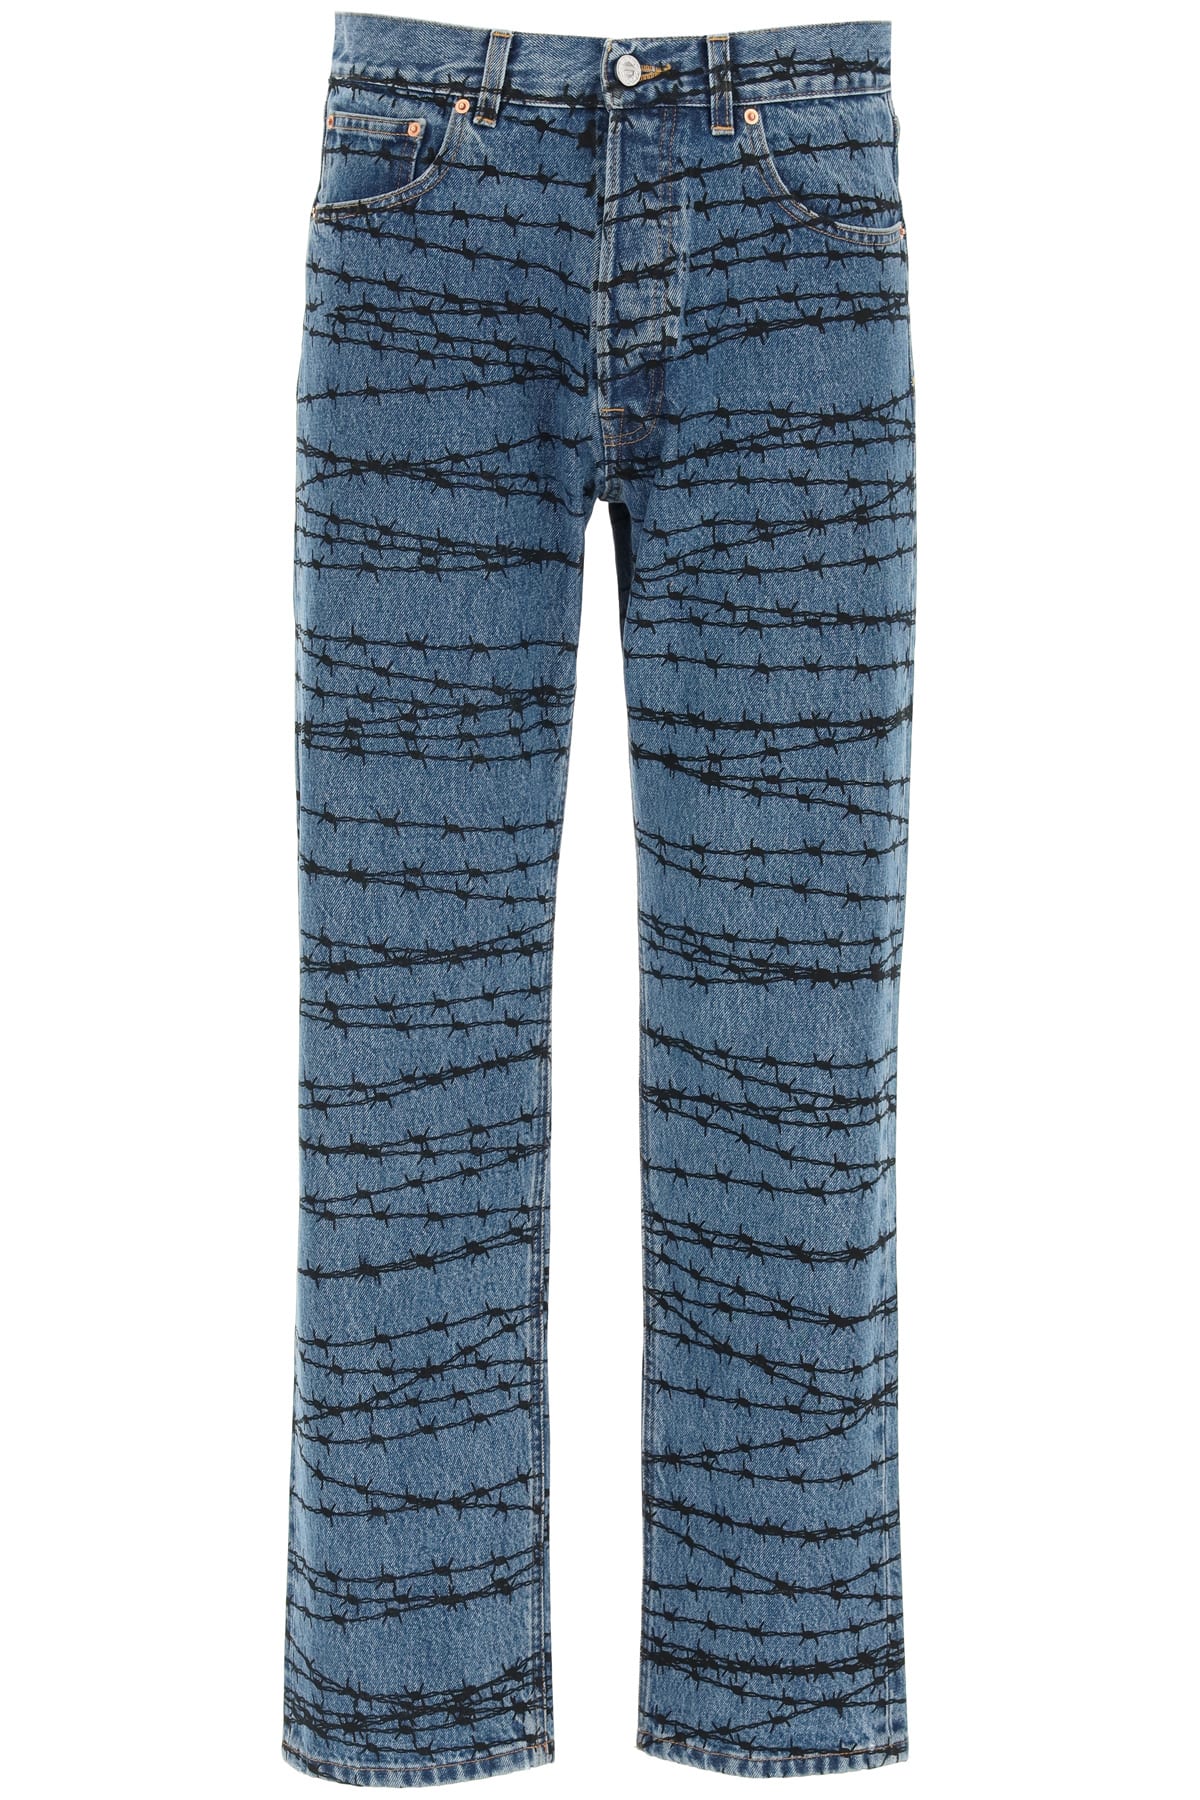 VETEMENTS Wired Print Jeans